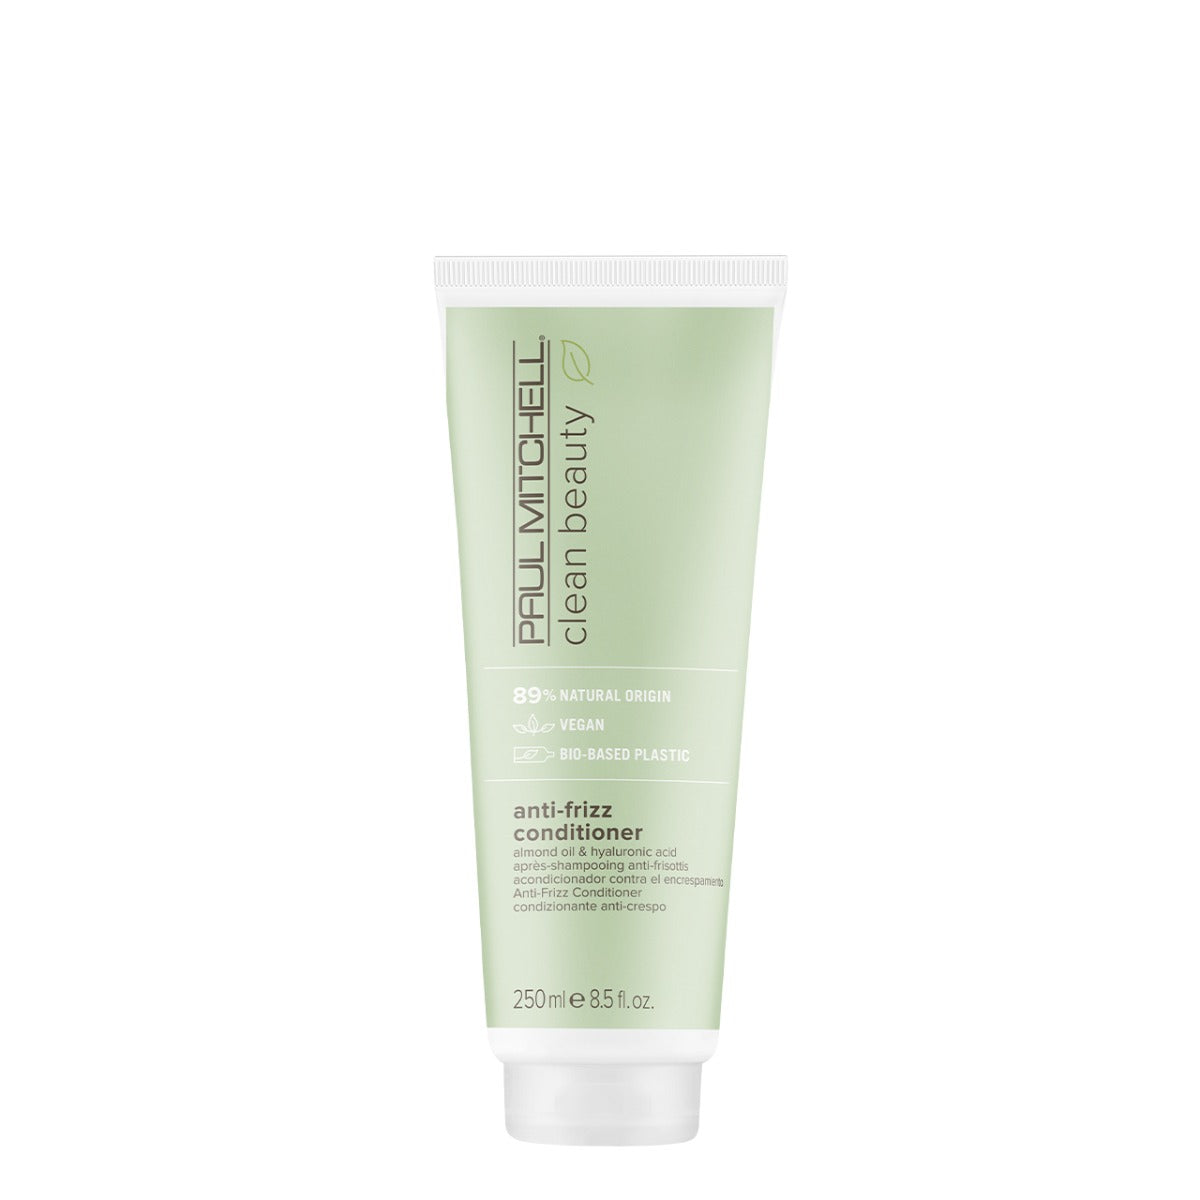 Clean Beauty Anti-Frizz Conditioner - by Paul Mitchell |ProCare Outlet|